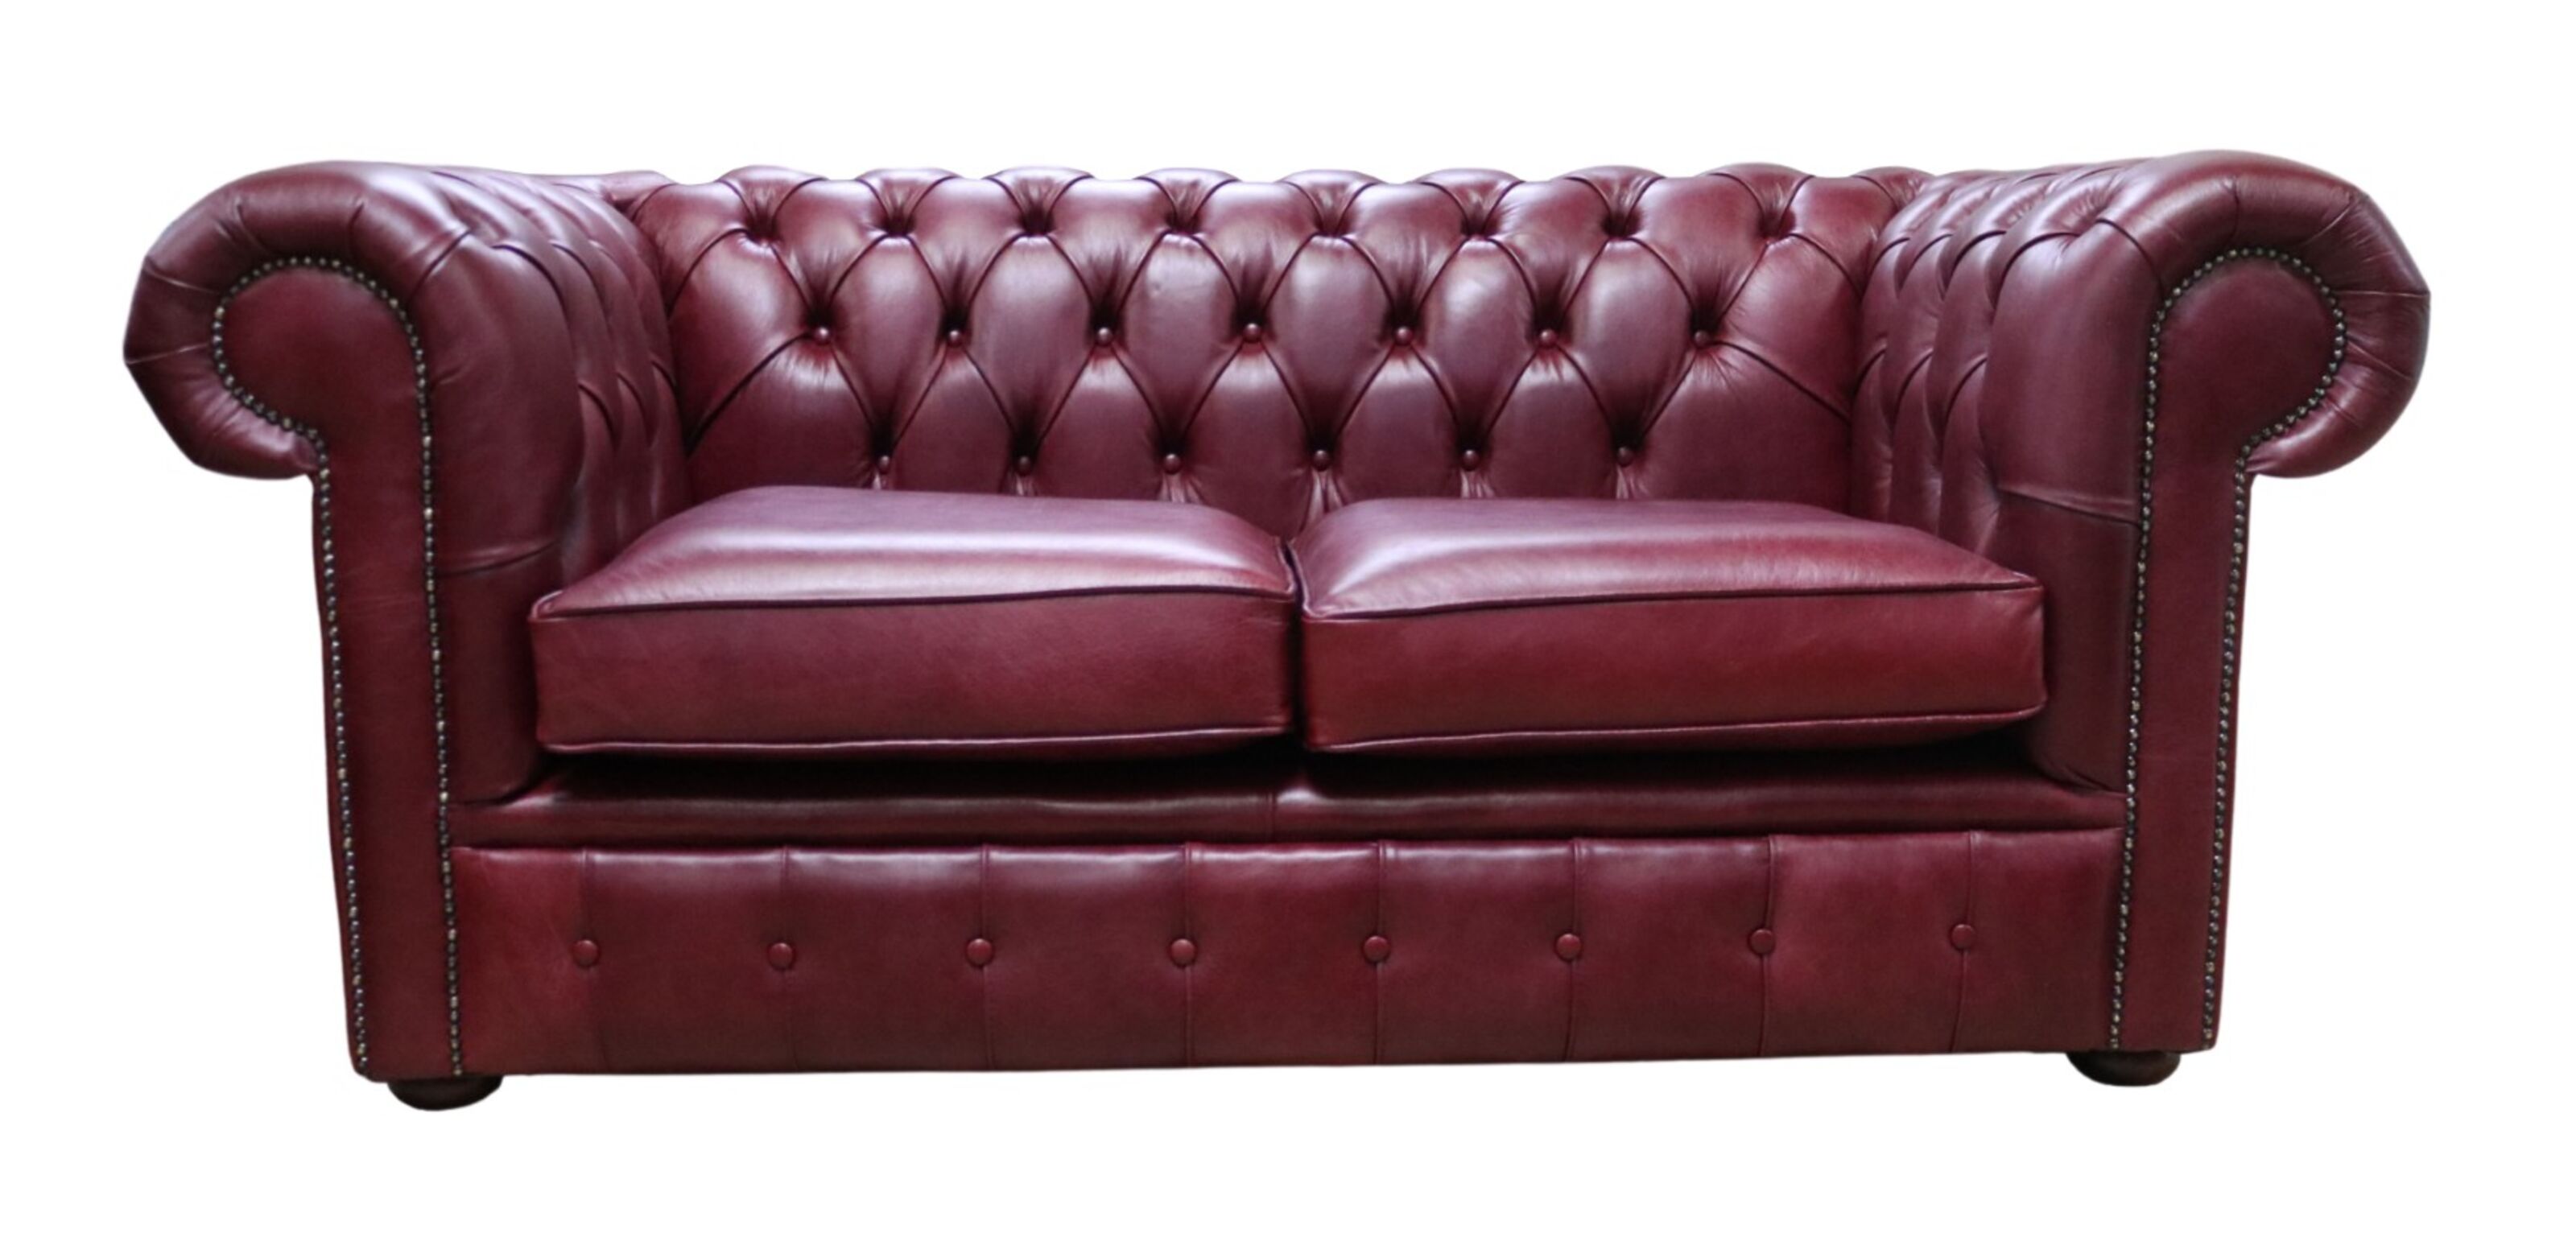 Burdy Leather Chesterfield Sofa Uk, Leather Chesterfield Couch